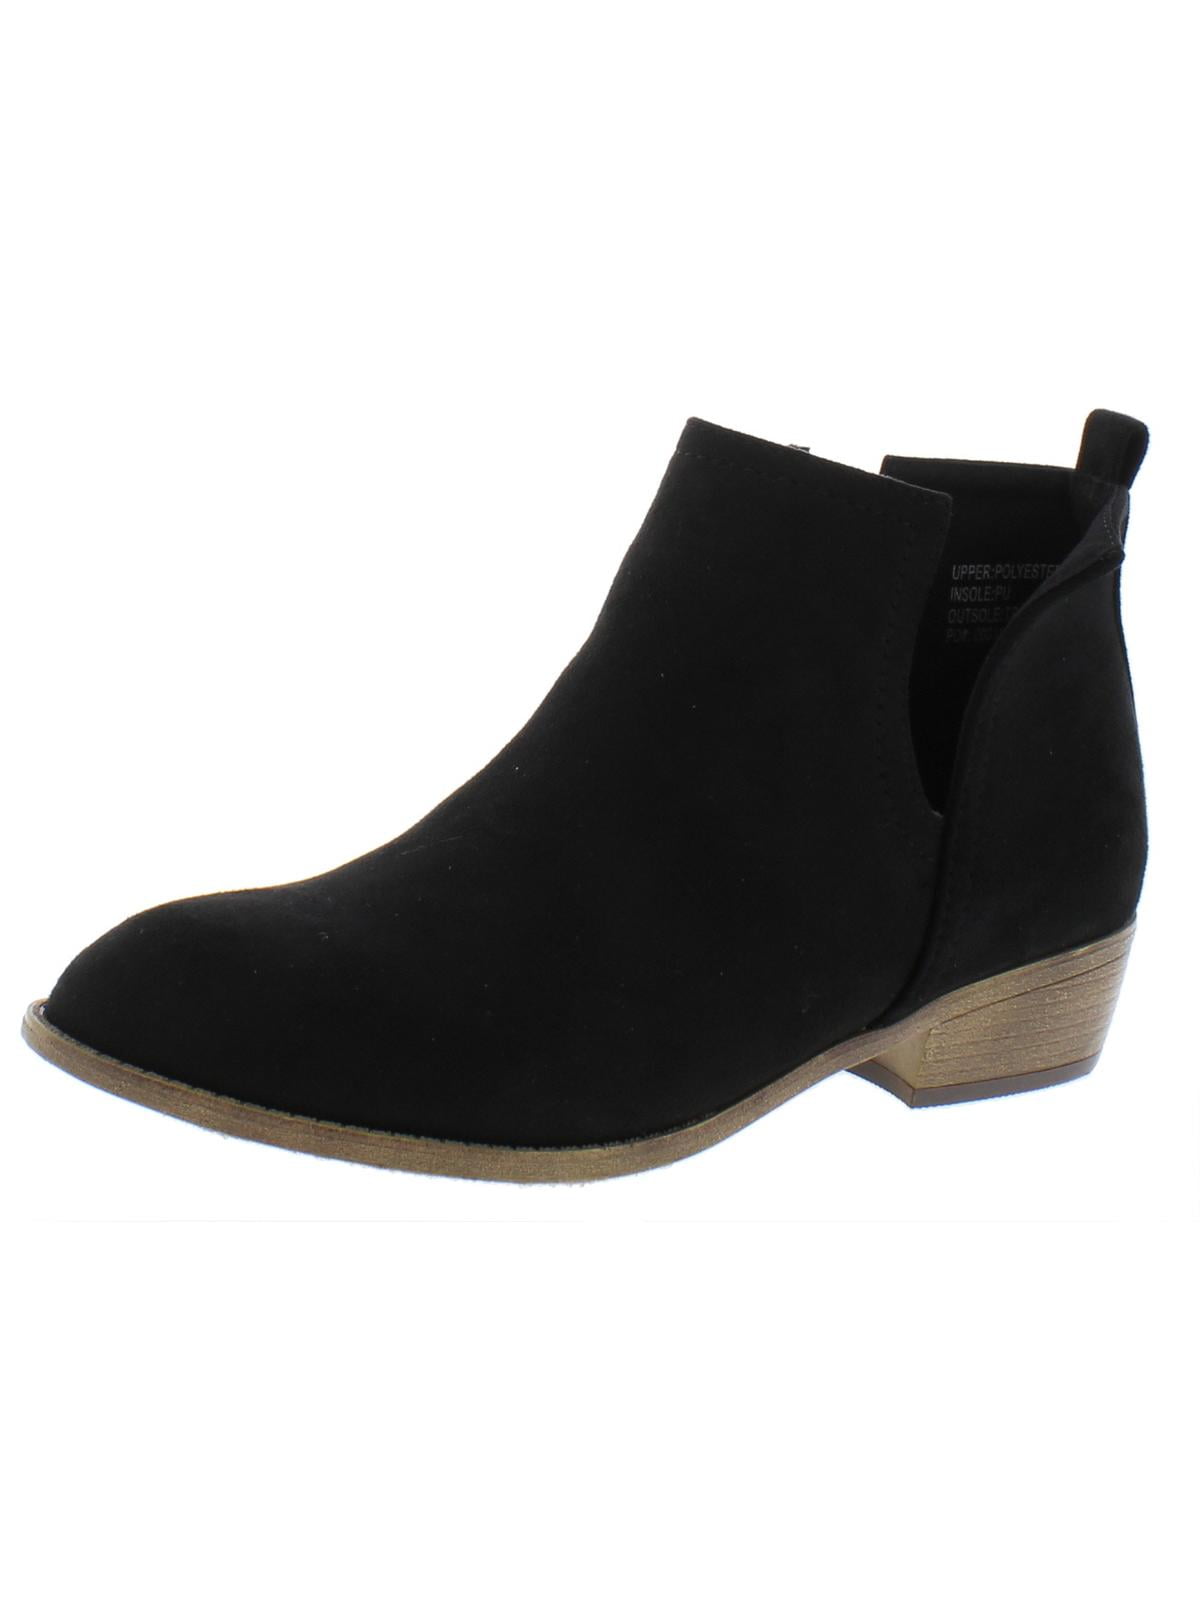 Journee Collection Womens Rimi Faux Suede Stacked Ankle Boots - Walmart.com